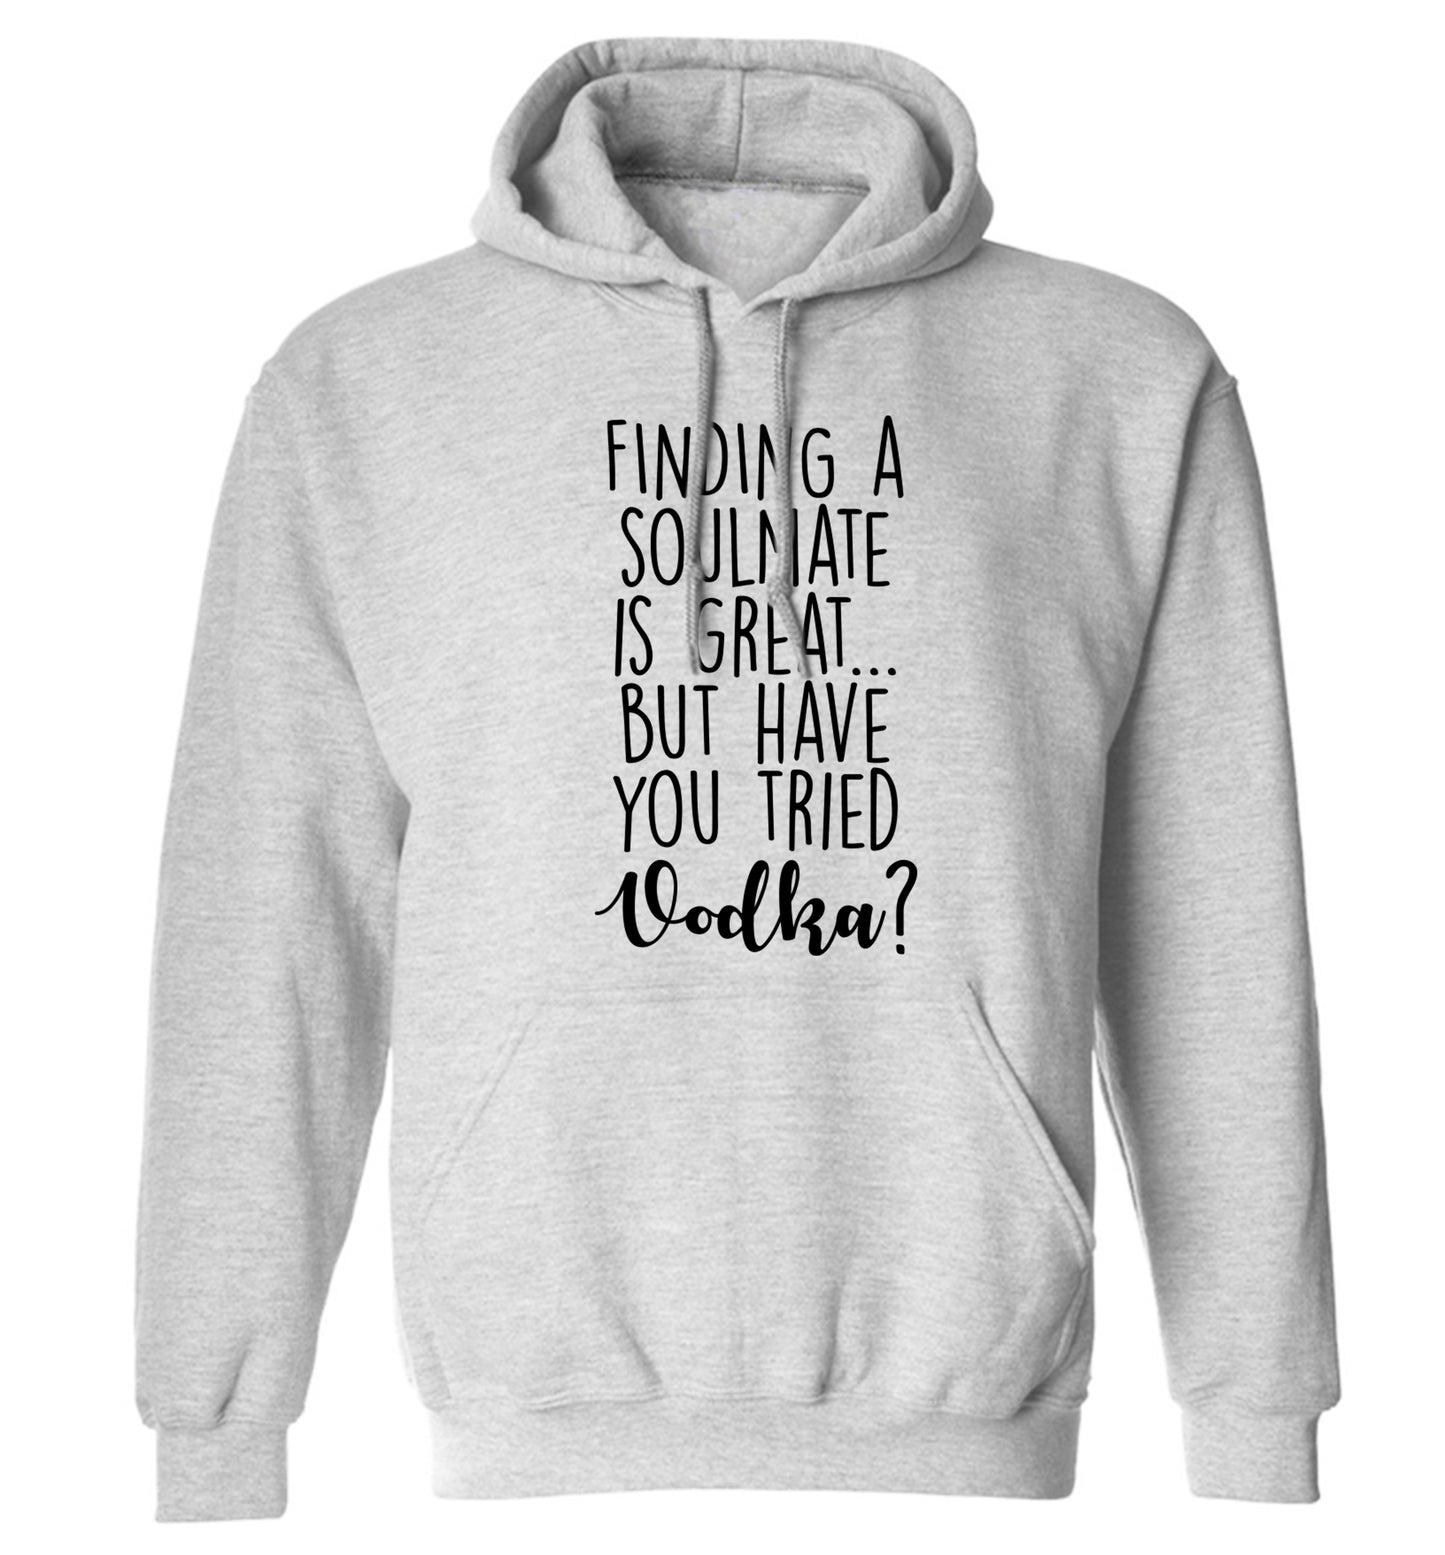 Finding a soulmate is great but have you tried vodka? adults unisex grey hoodie 2XL